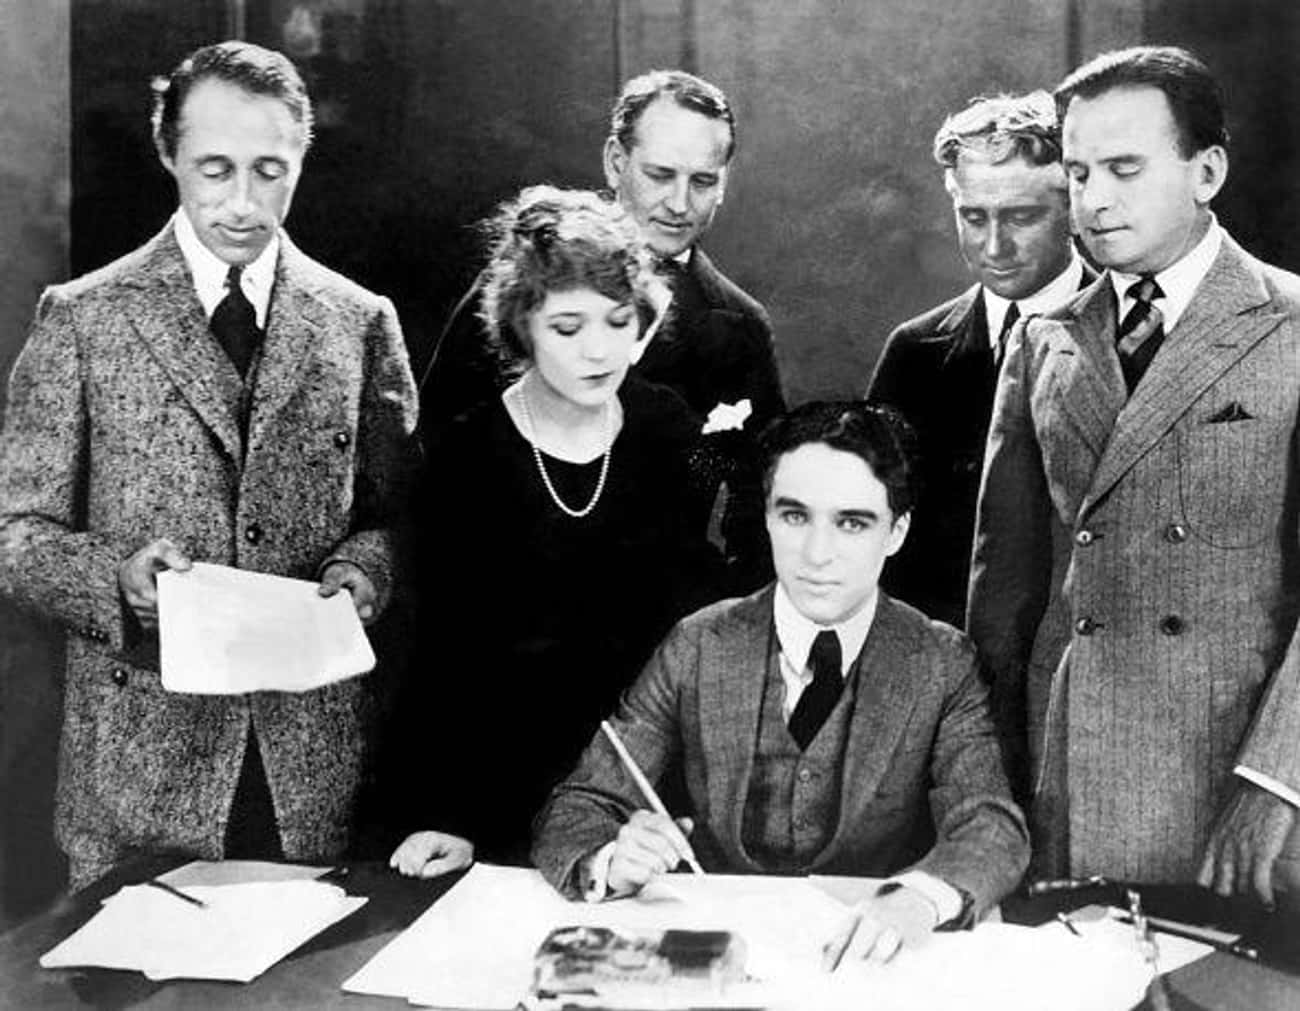 D.W. Griffith, Mary Pickford, Charlie Chaplin, Douglas Fairbanks, And Their Attorneys Sign The Papers Officially Creating The United Artists Corporation, April 17, 1919